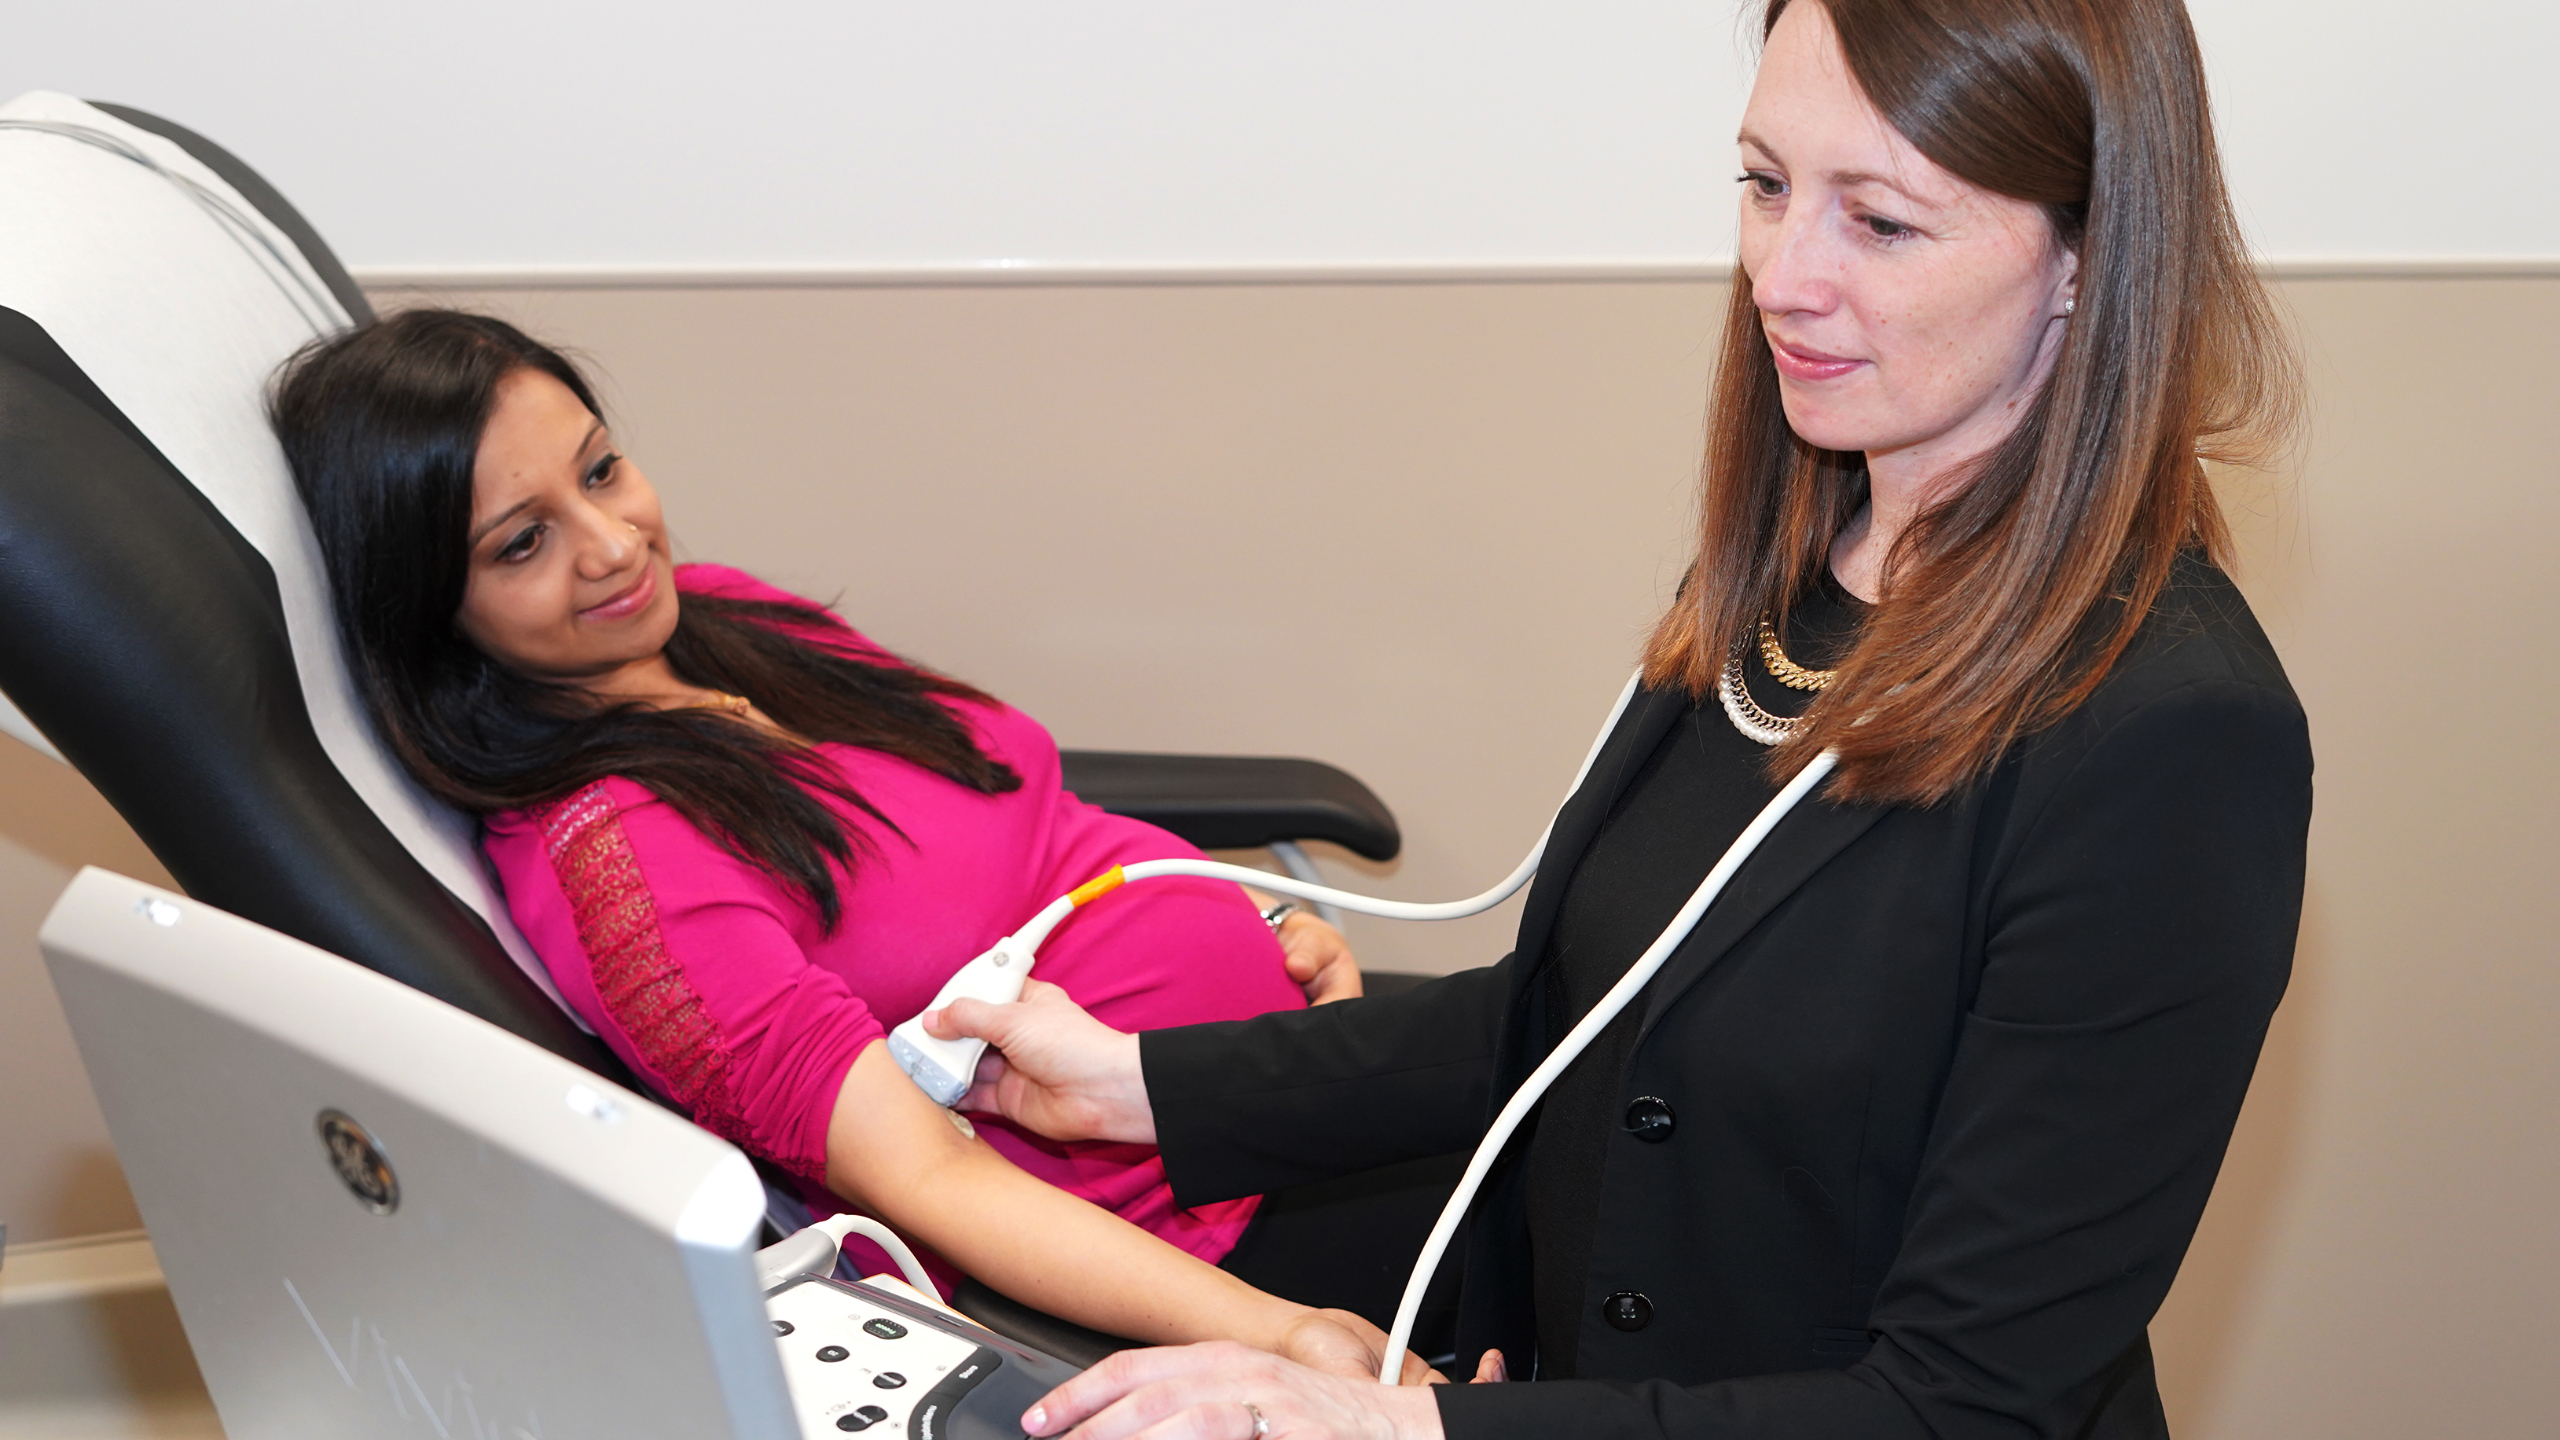 dark-haired woman in a black shirt and black blazer stands in front of patient taking an ultrasound of patient’s arm. Pregnant, dark-haired female patient in dark pink shirt lies back on doctor’s chair while receiving ultrasound on arm